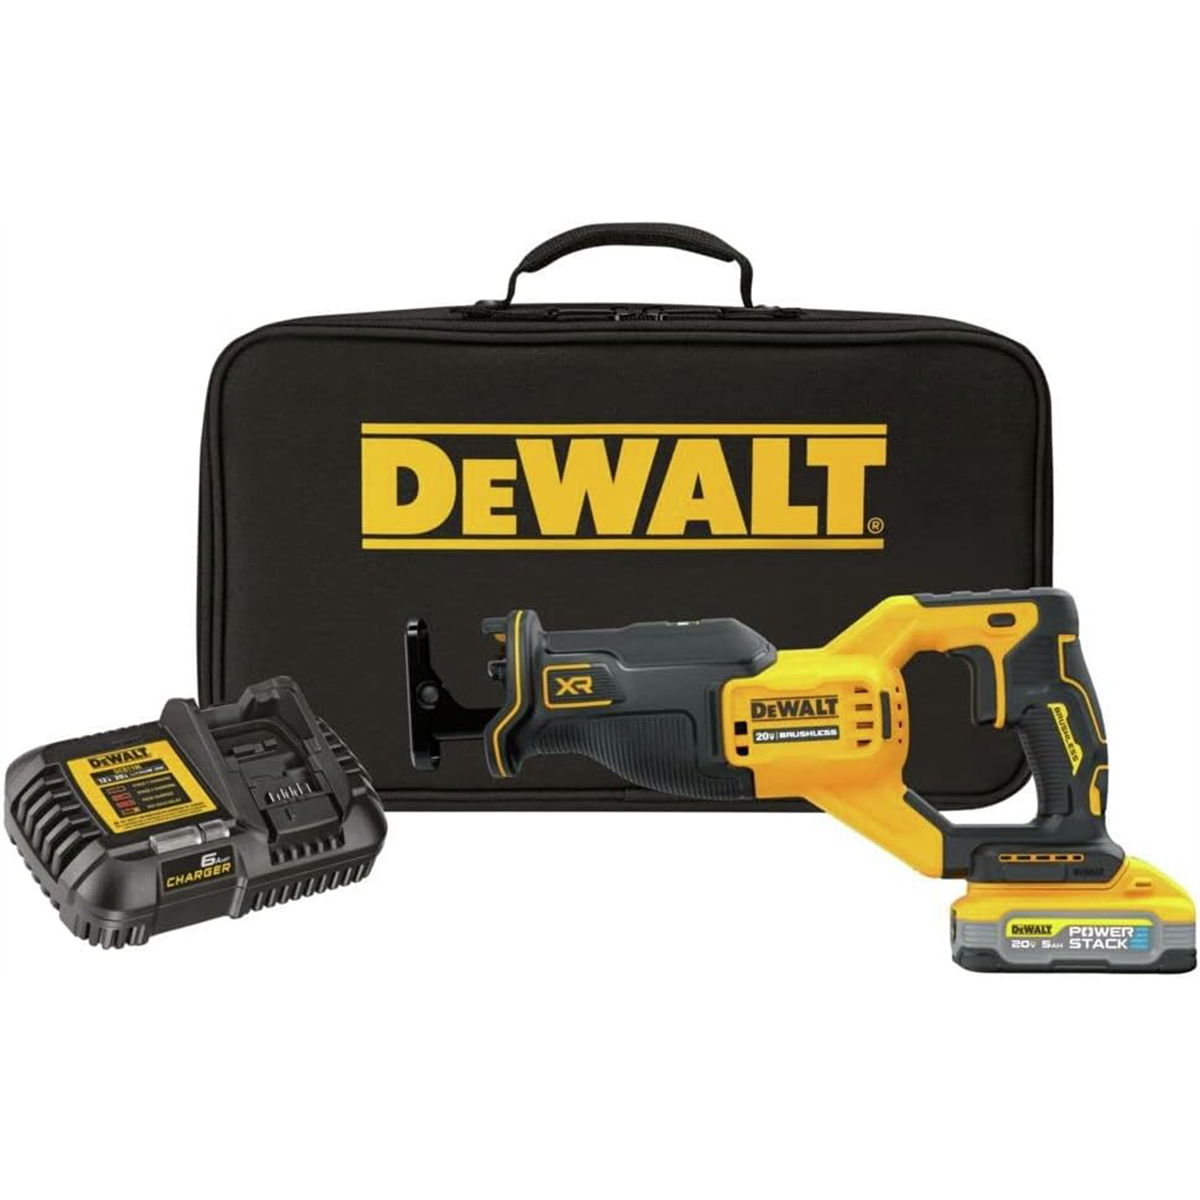 Picture of DeWalt DWTDCS382H1 20V Max Xtreme Brushless Cordless Reciprocating Saw Kit with Powewrstack 5.0 Ah Battery